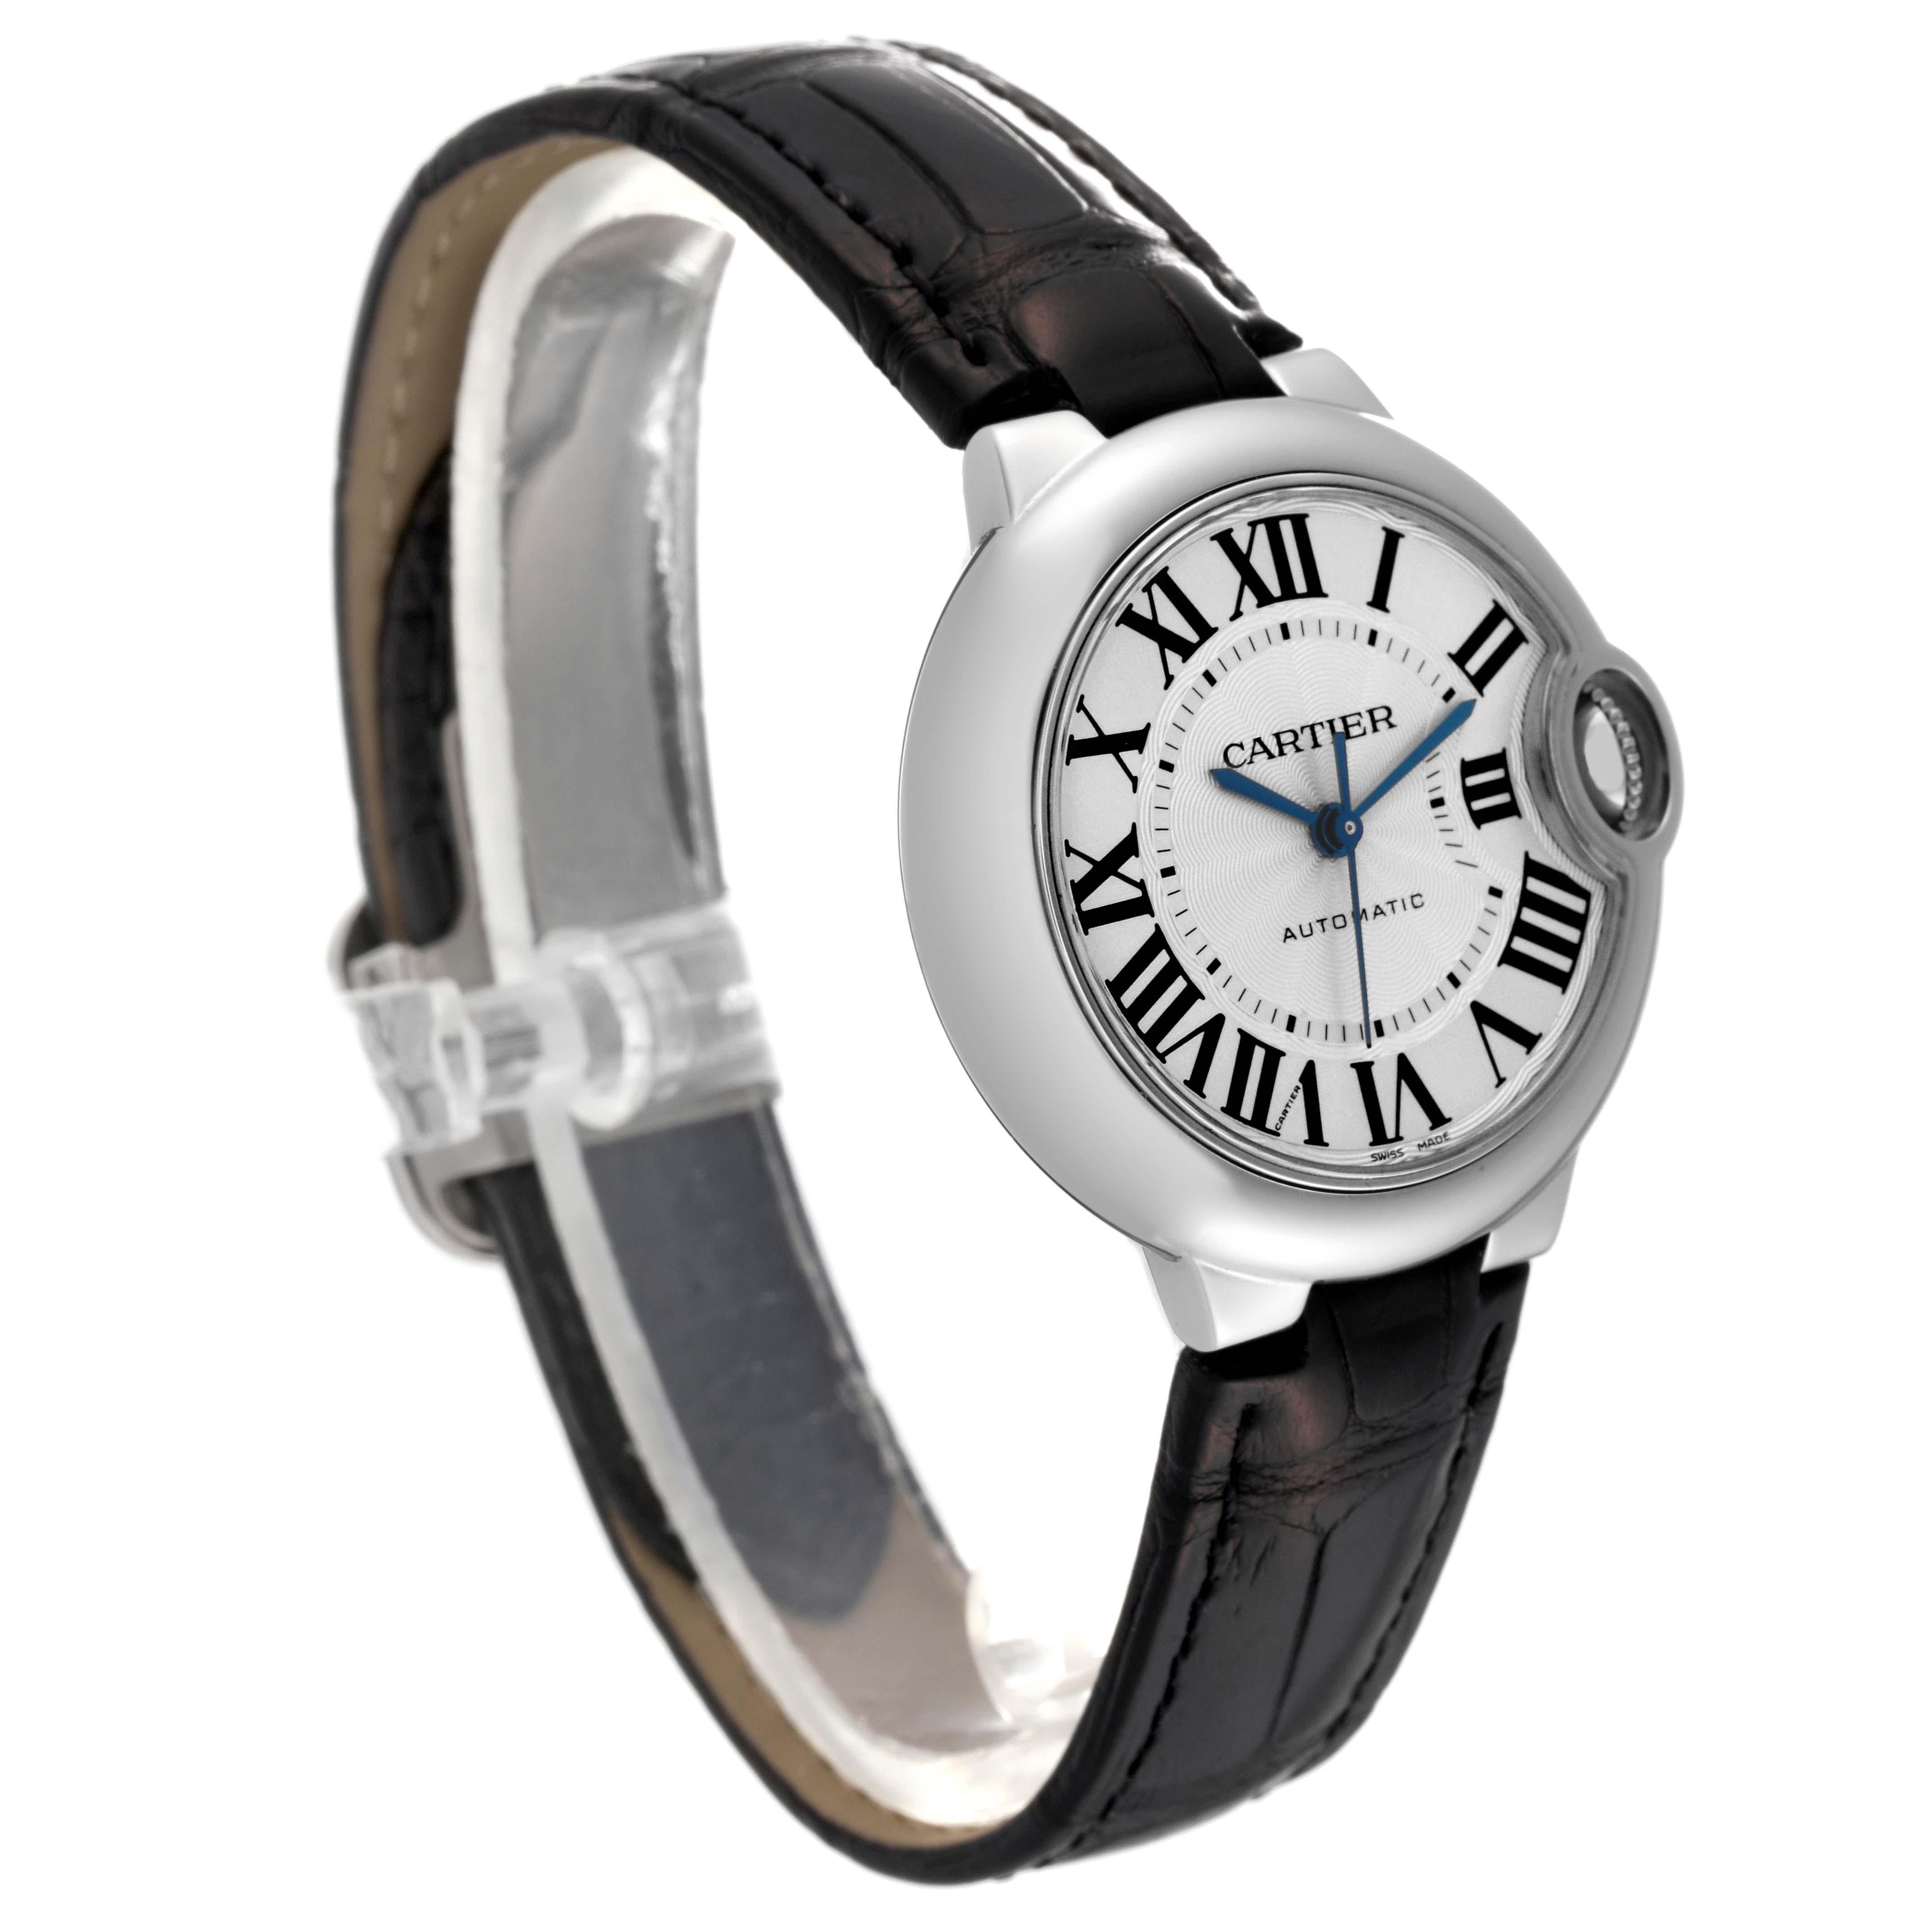 Cartier Ballon Bleu Steel Automatic Ladies Watch W6920085. Automatic self-winding movement. Caliber 076. Stainless steel case 33.0 mm in diameter. Fluted crown set with the blue spinel cabochon. Stainless steel smooth bezel. Scratch resistant